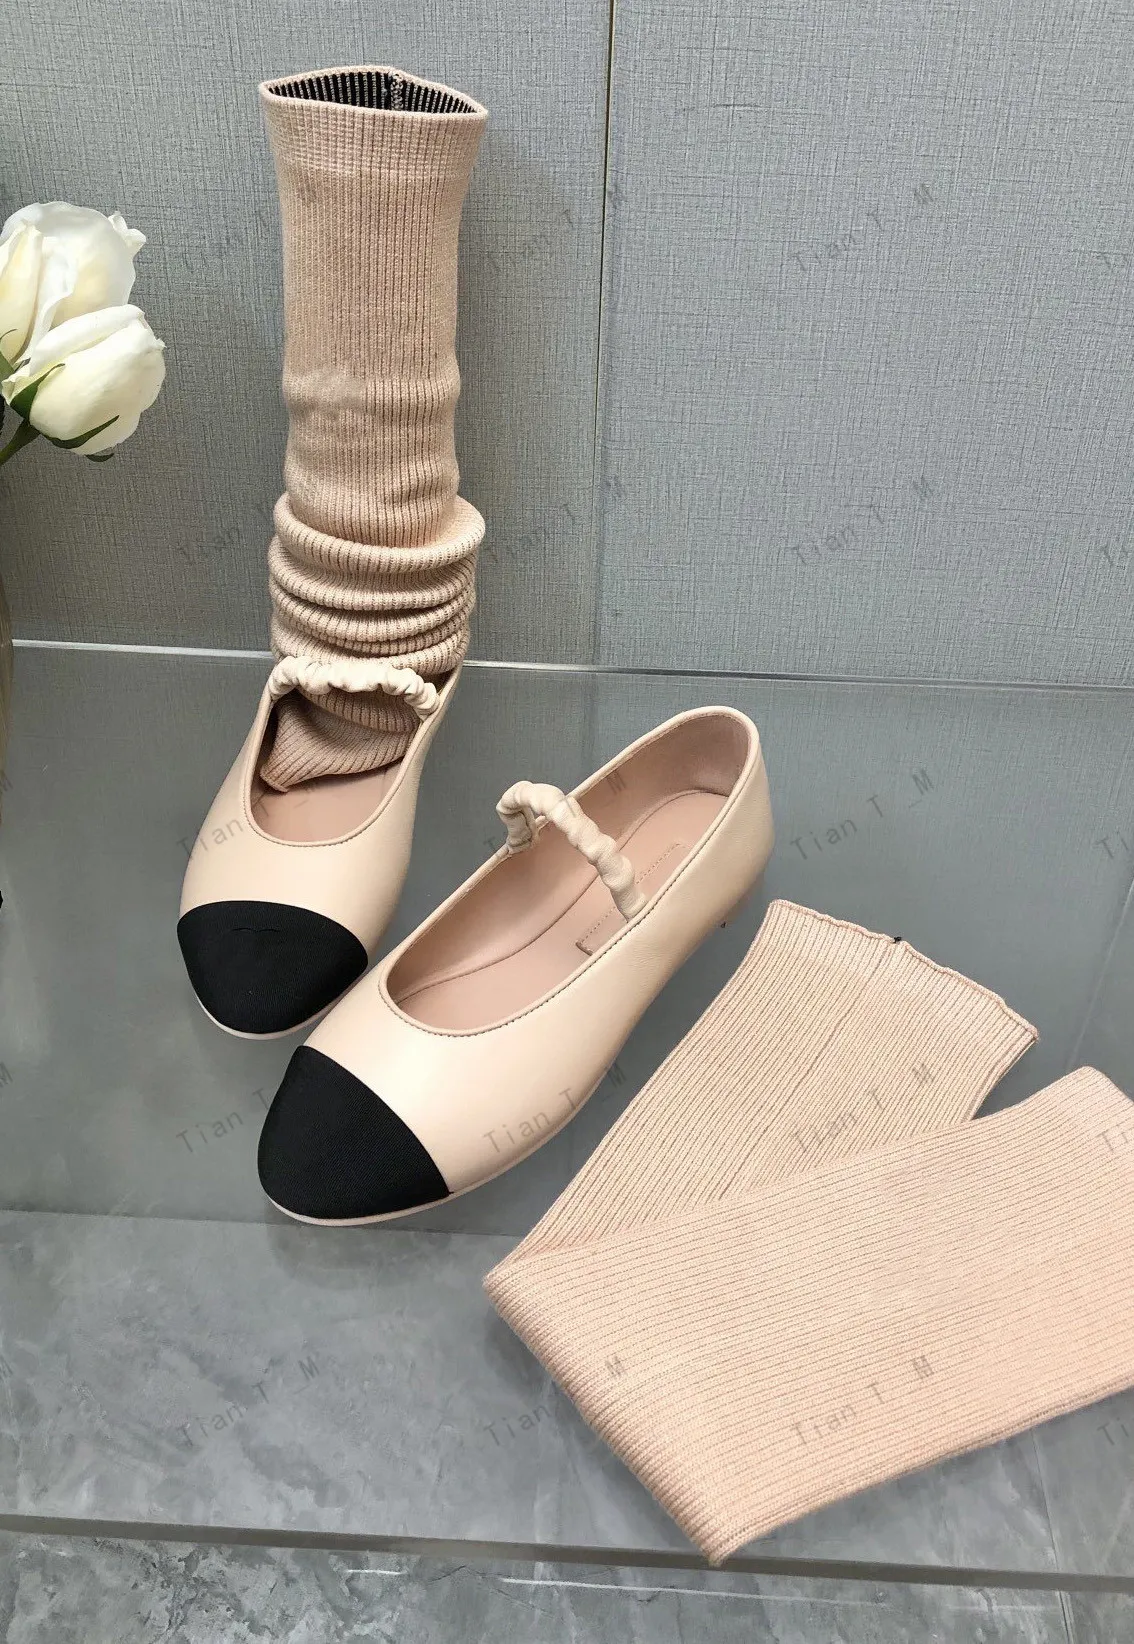 Newest Top Quality Elegant Retro Ballet Sock Shoes Spring Candy Colours Mary Jane Shoes Women Classic Mixed Color pumps Round Toe Flats Real Leather